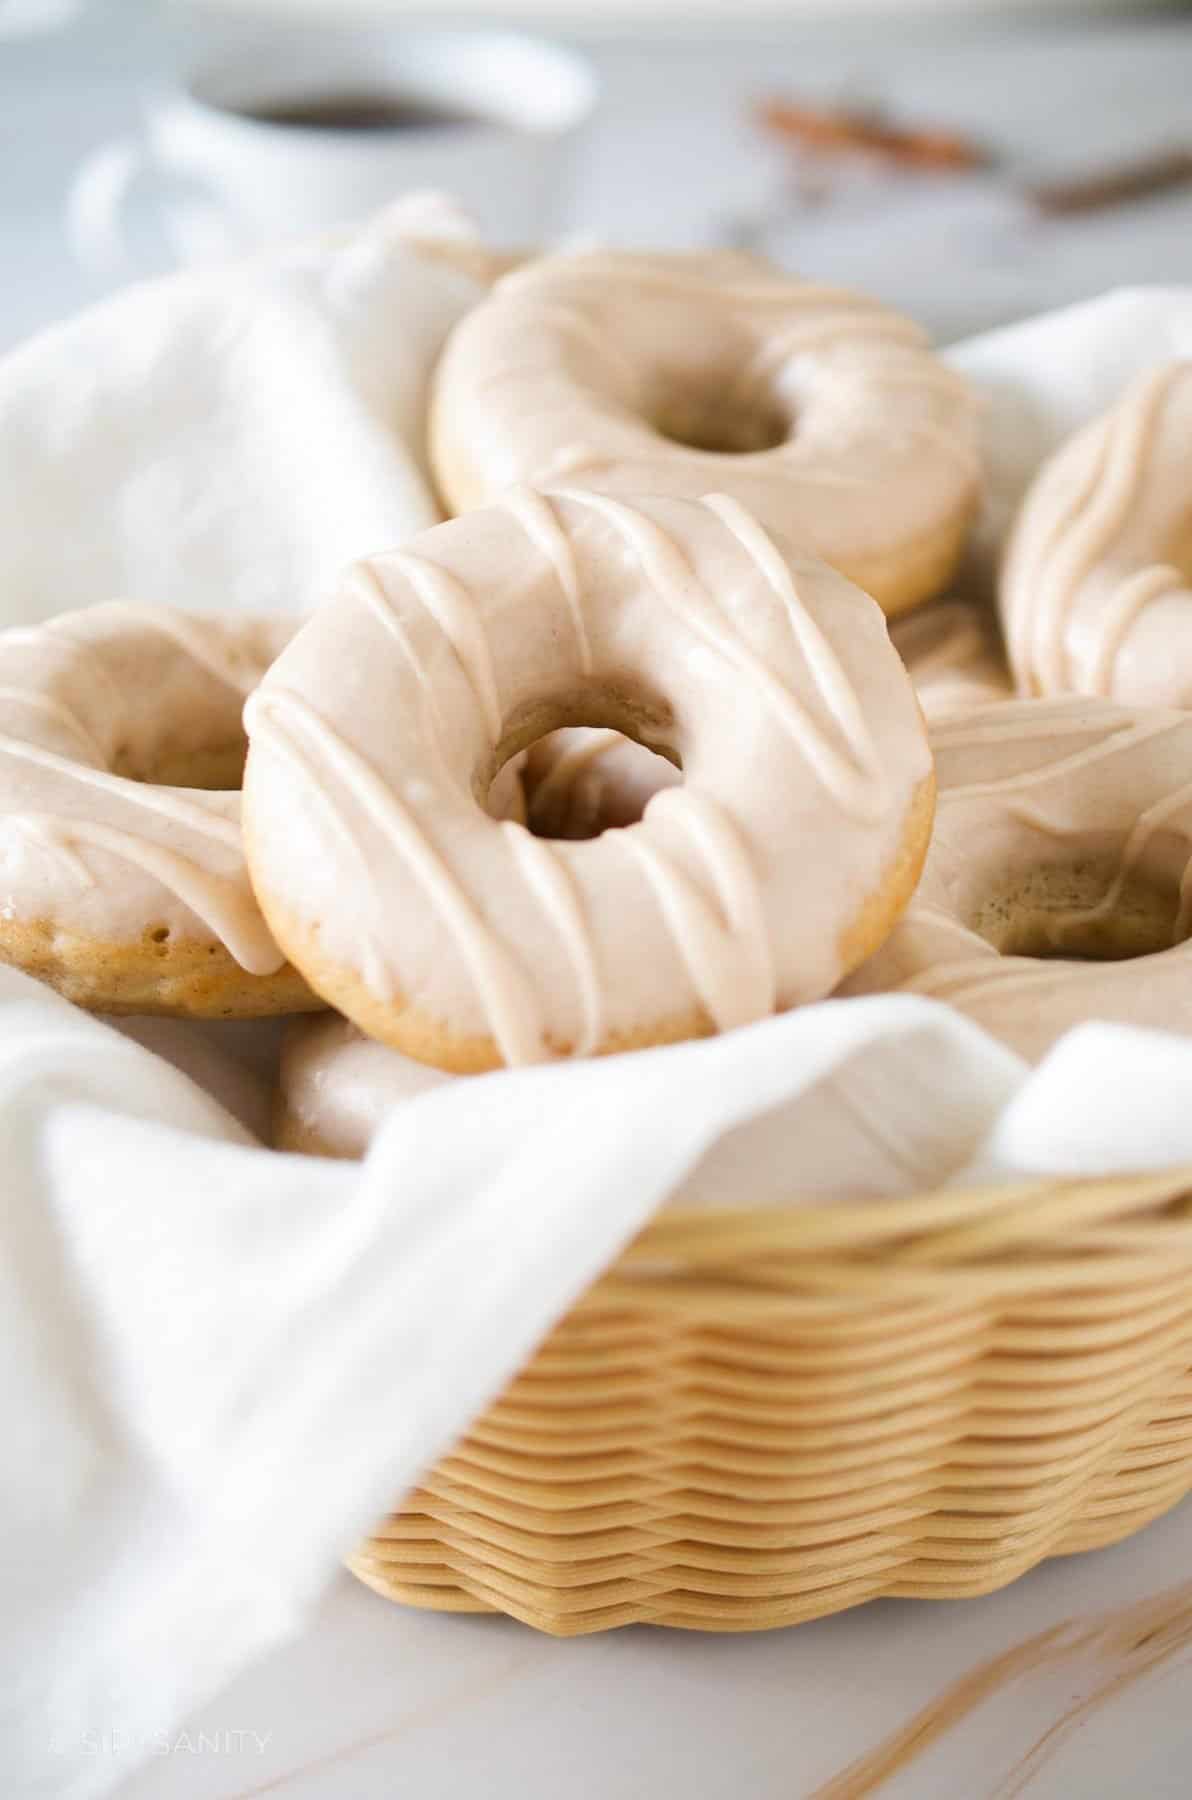 A basket filled with iced donuts.